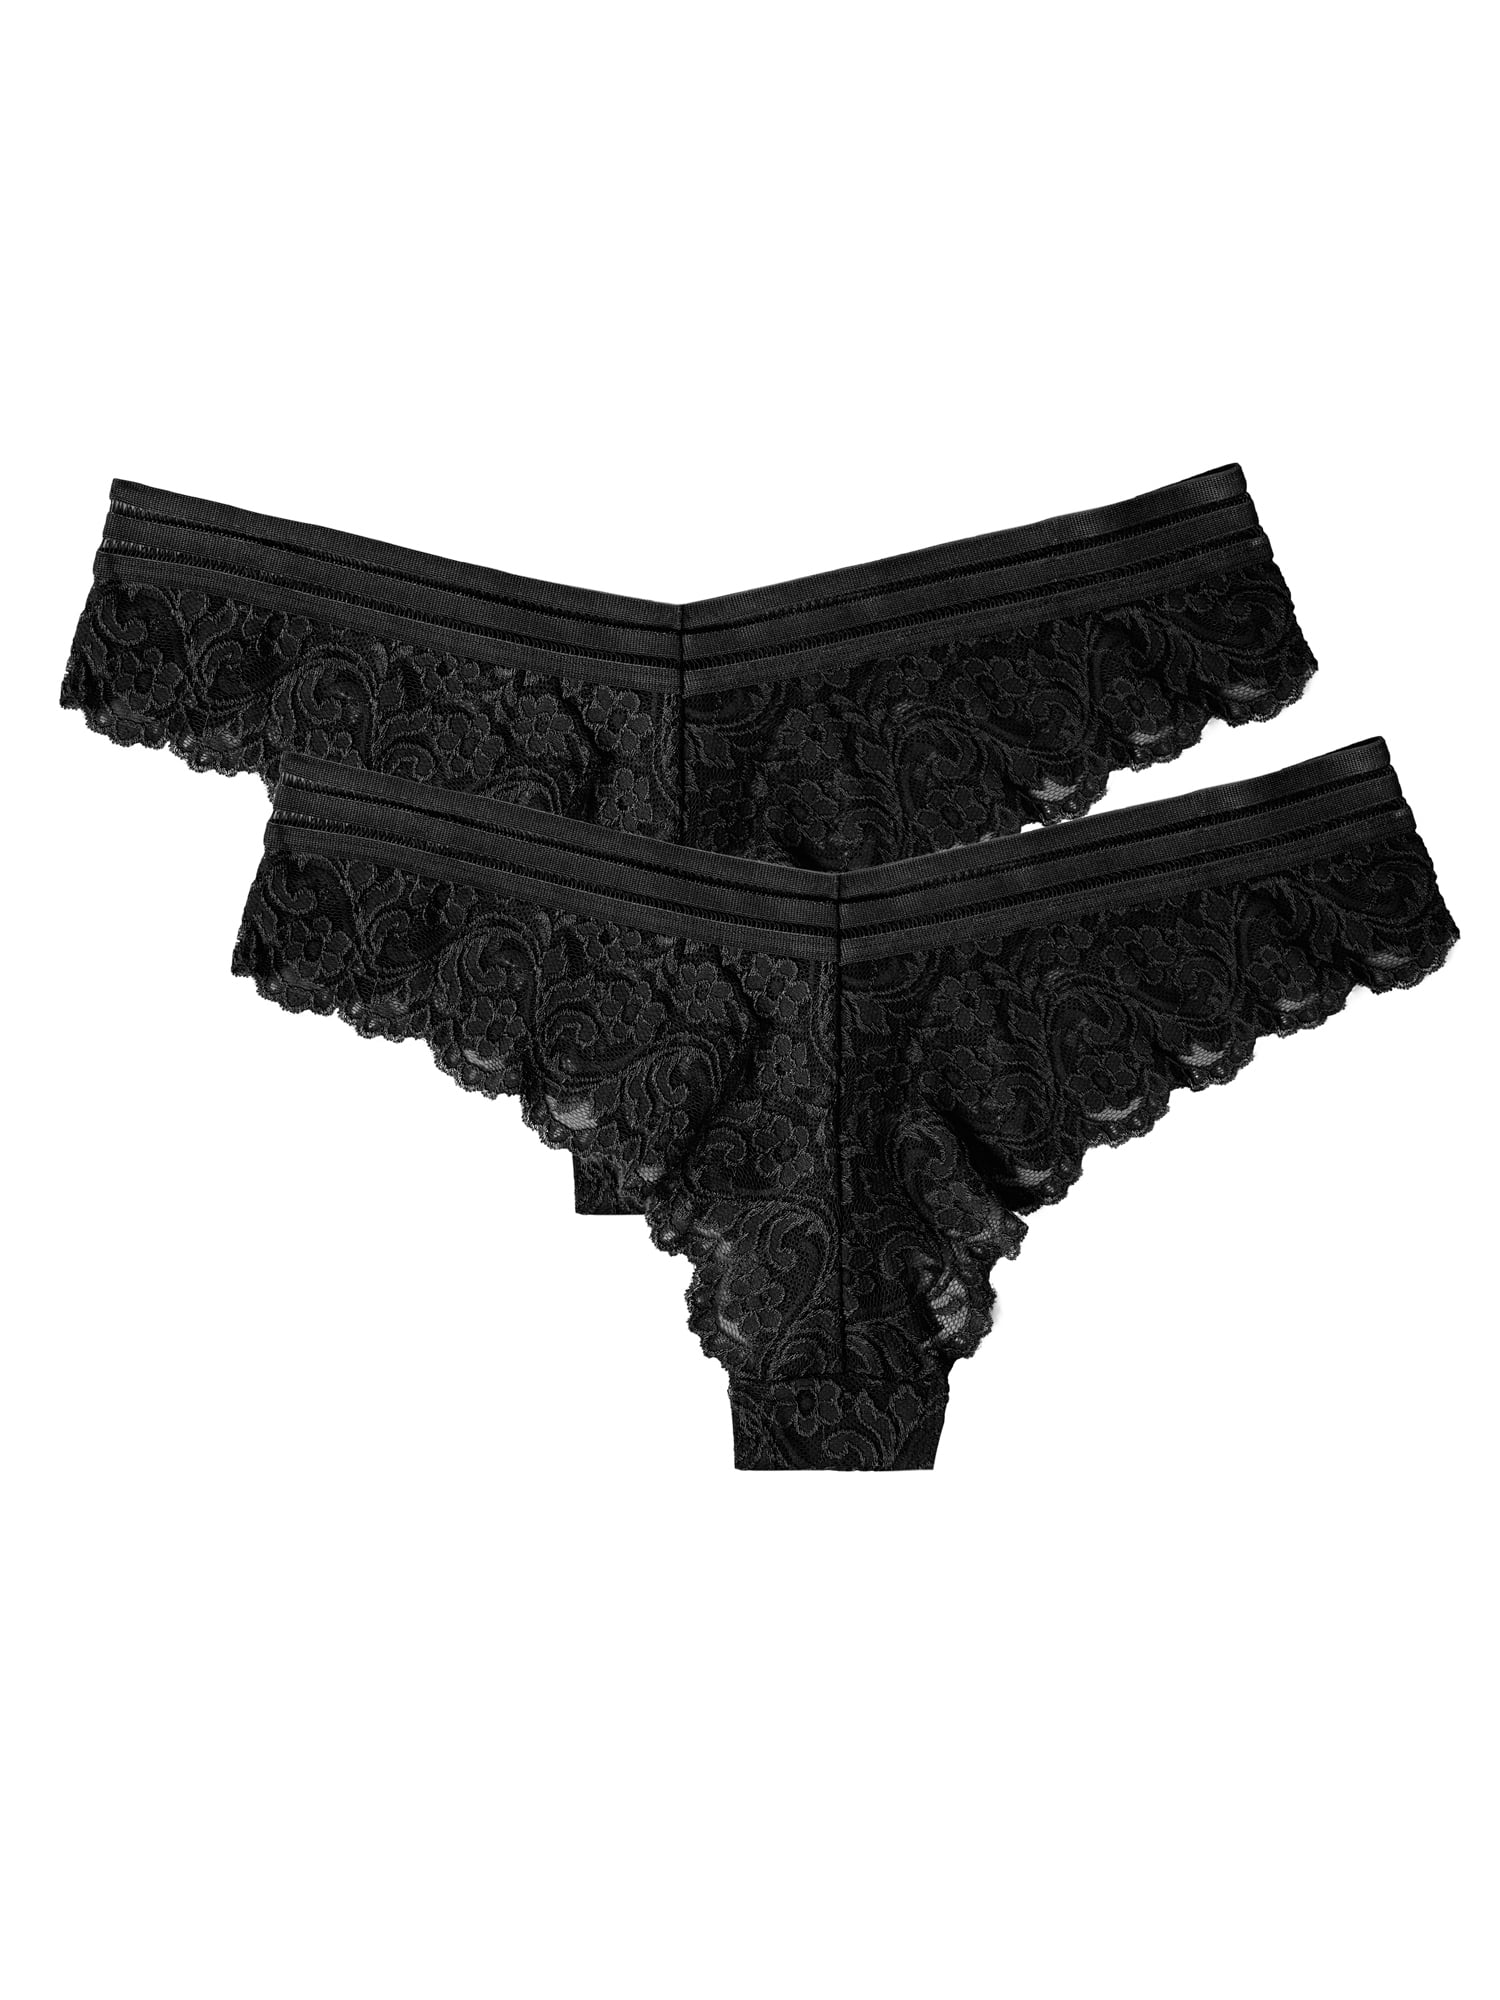  Smart & Sexy Women's Signature Lace Thong Panty 2 Pack